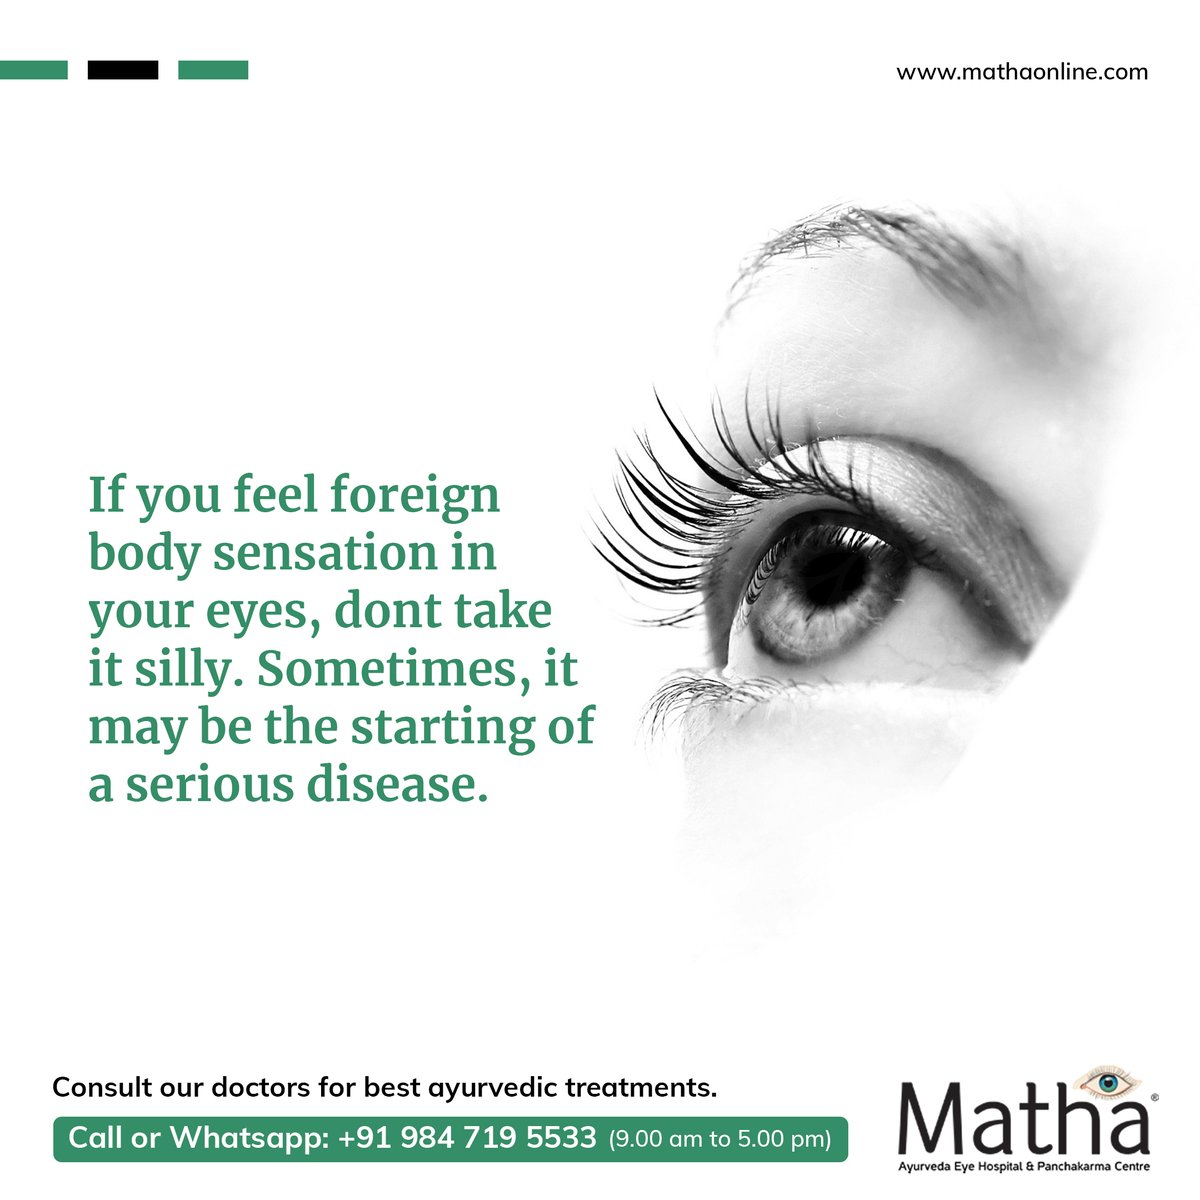 If you feel foreign body sensation in your eyes, don't take it silly. Sometimes, it may be the starting of a serious disease.

For appointments 📞+91 9847195533

#keralaayurveda #ayurvedahospital #ayur #mathaayurveda #ayurvedahospital #ayurvedalifestyle #ayurvedaclinic